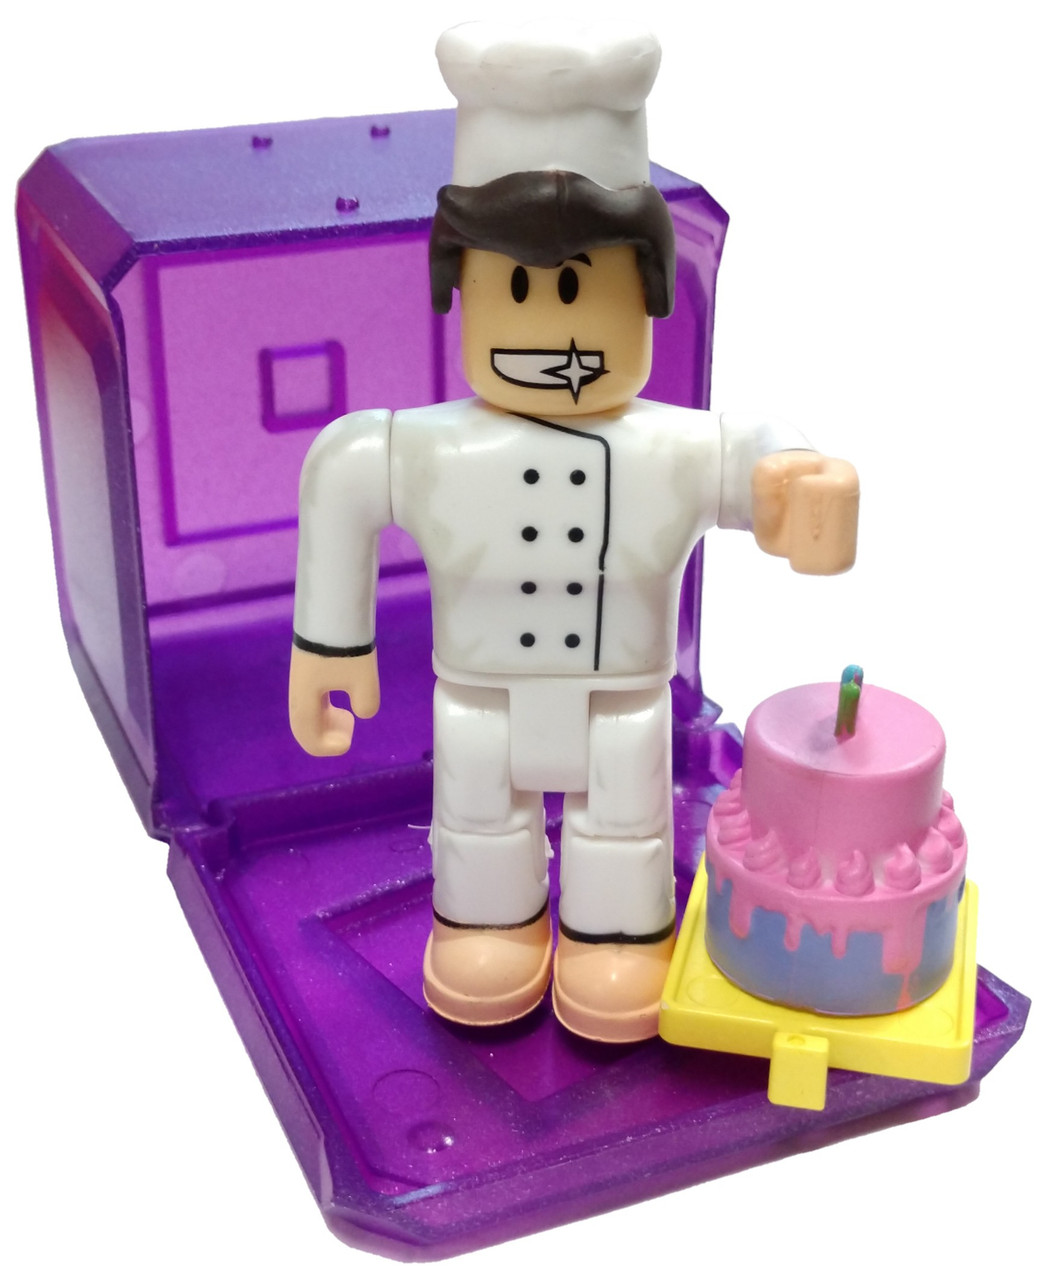 Roblox Celebrity Collection Series 3 Bakers Valley Cakemaster 3 Mini Figure With Cube And Online Code Loose Jazwares Toywiz - roblox series 3 with code box meepcity ice cream seller jazwares ice cream seller roblox ice cream